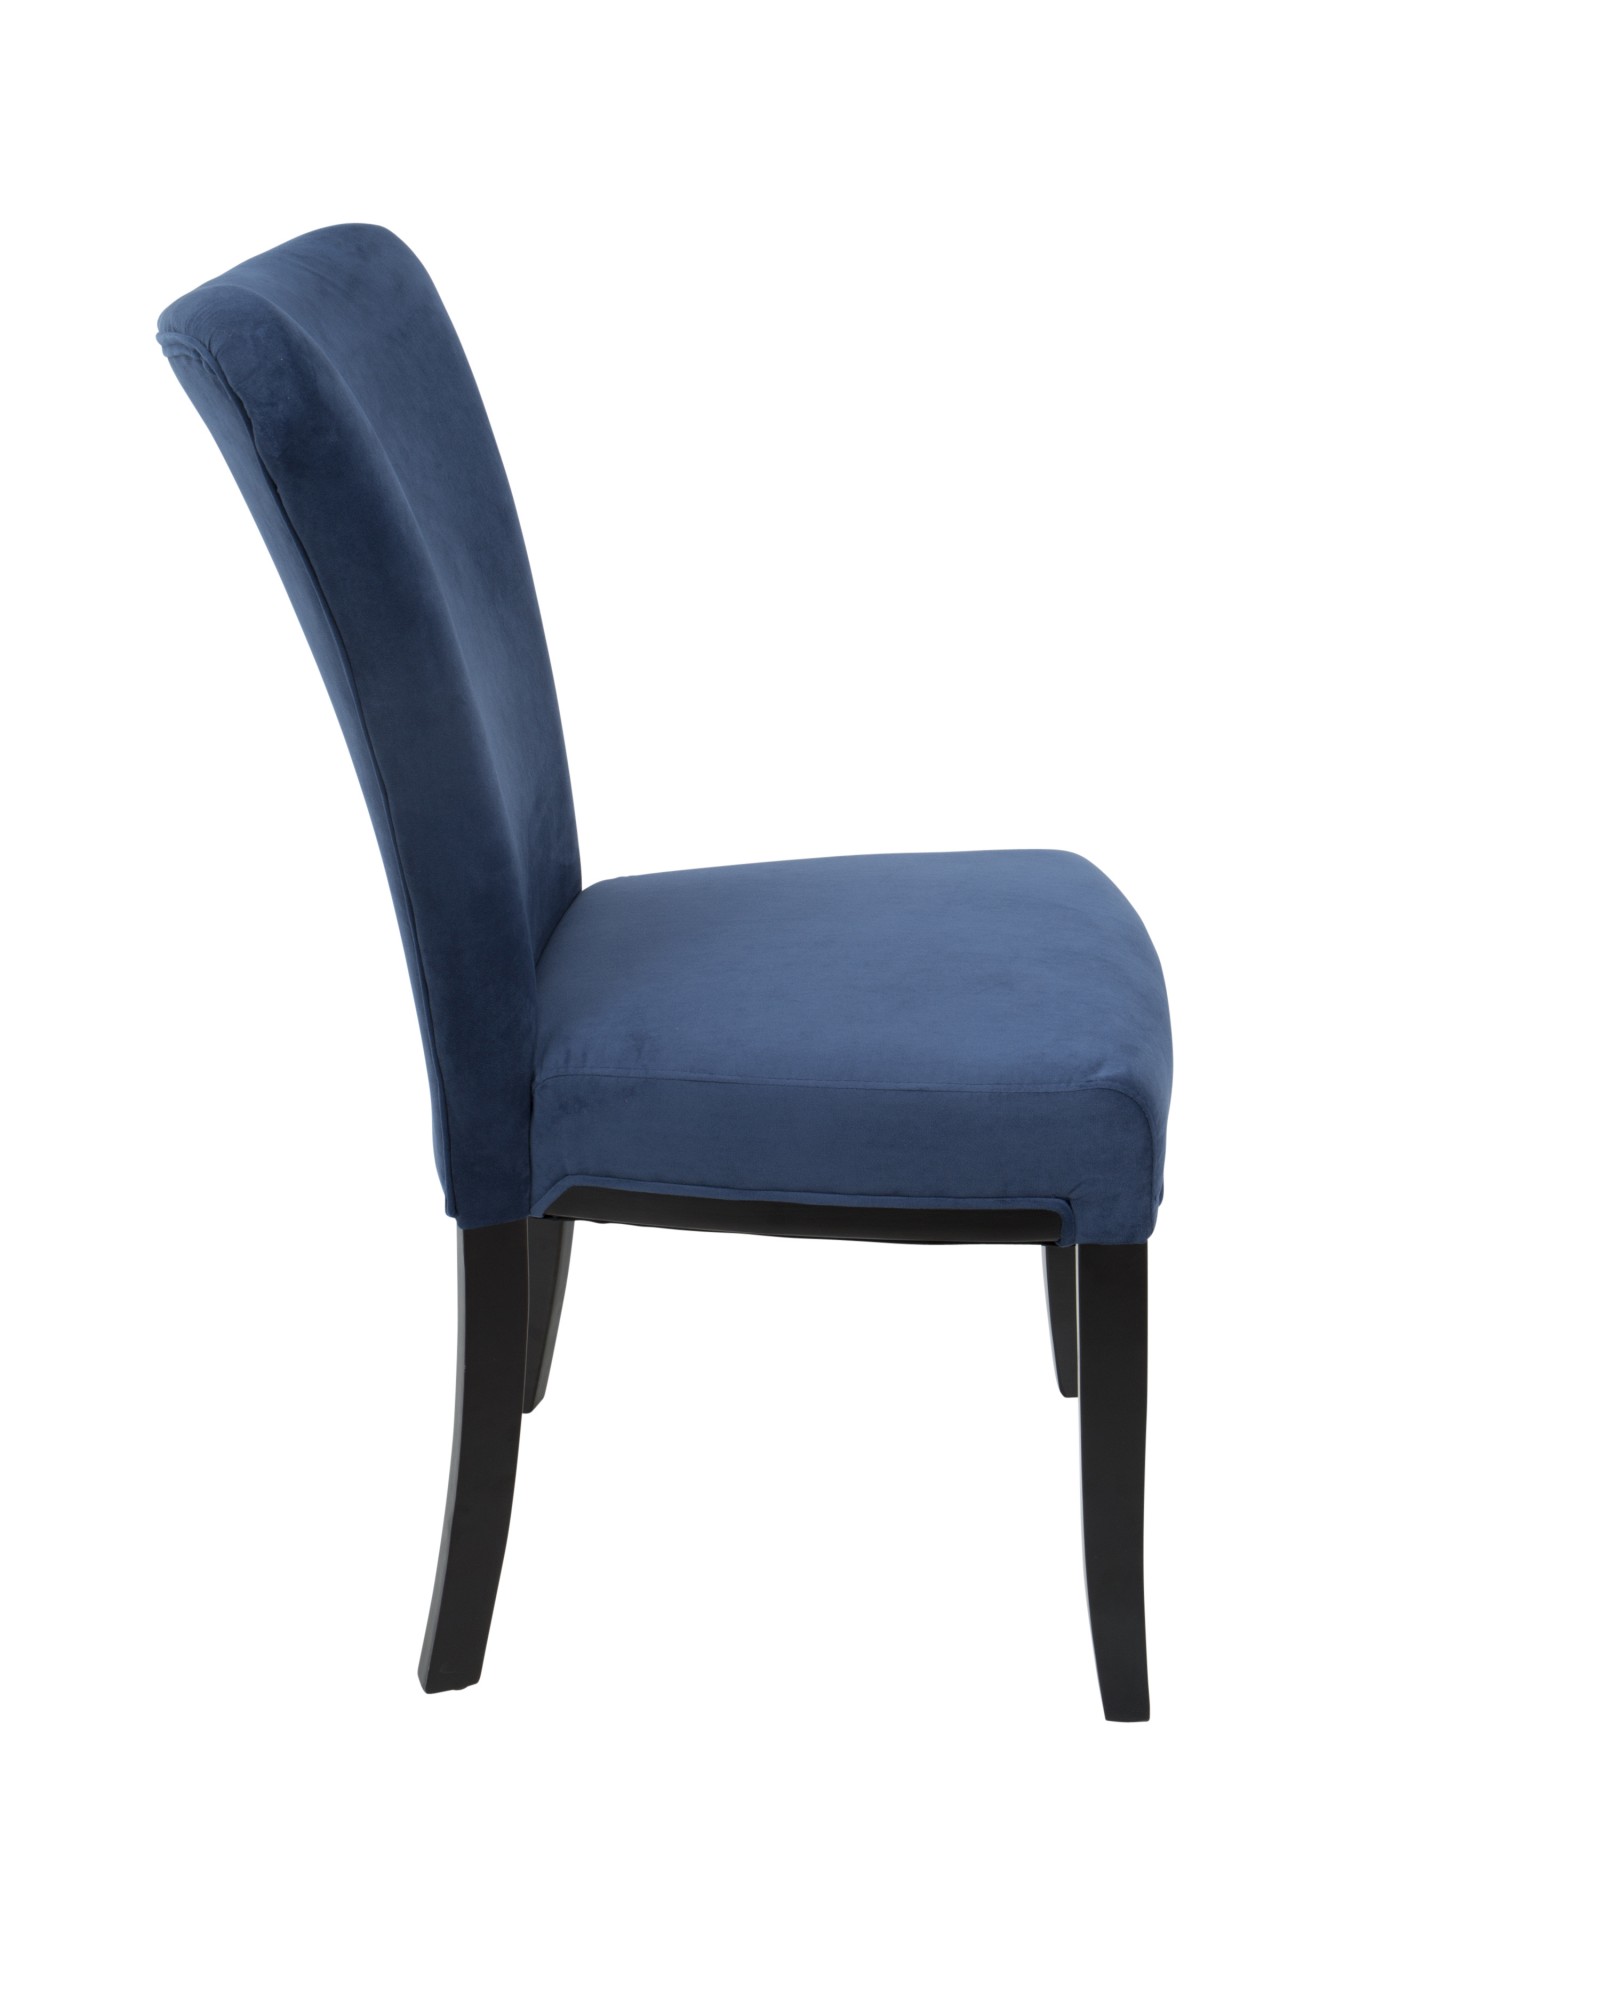 Olivia Contemporary Dining Chair in Espresso Wood and Navy Blue Velvet - Set of 2